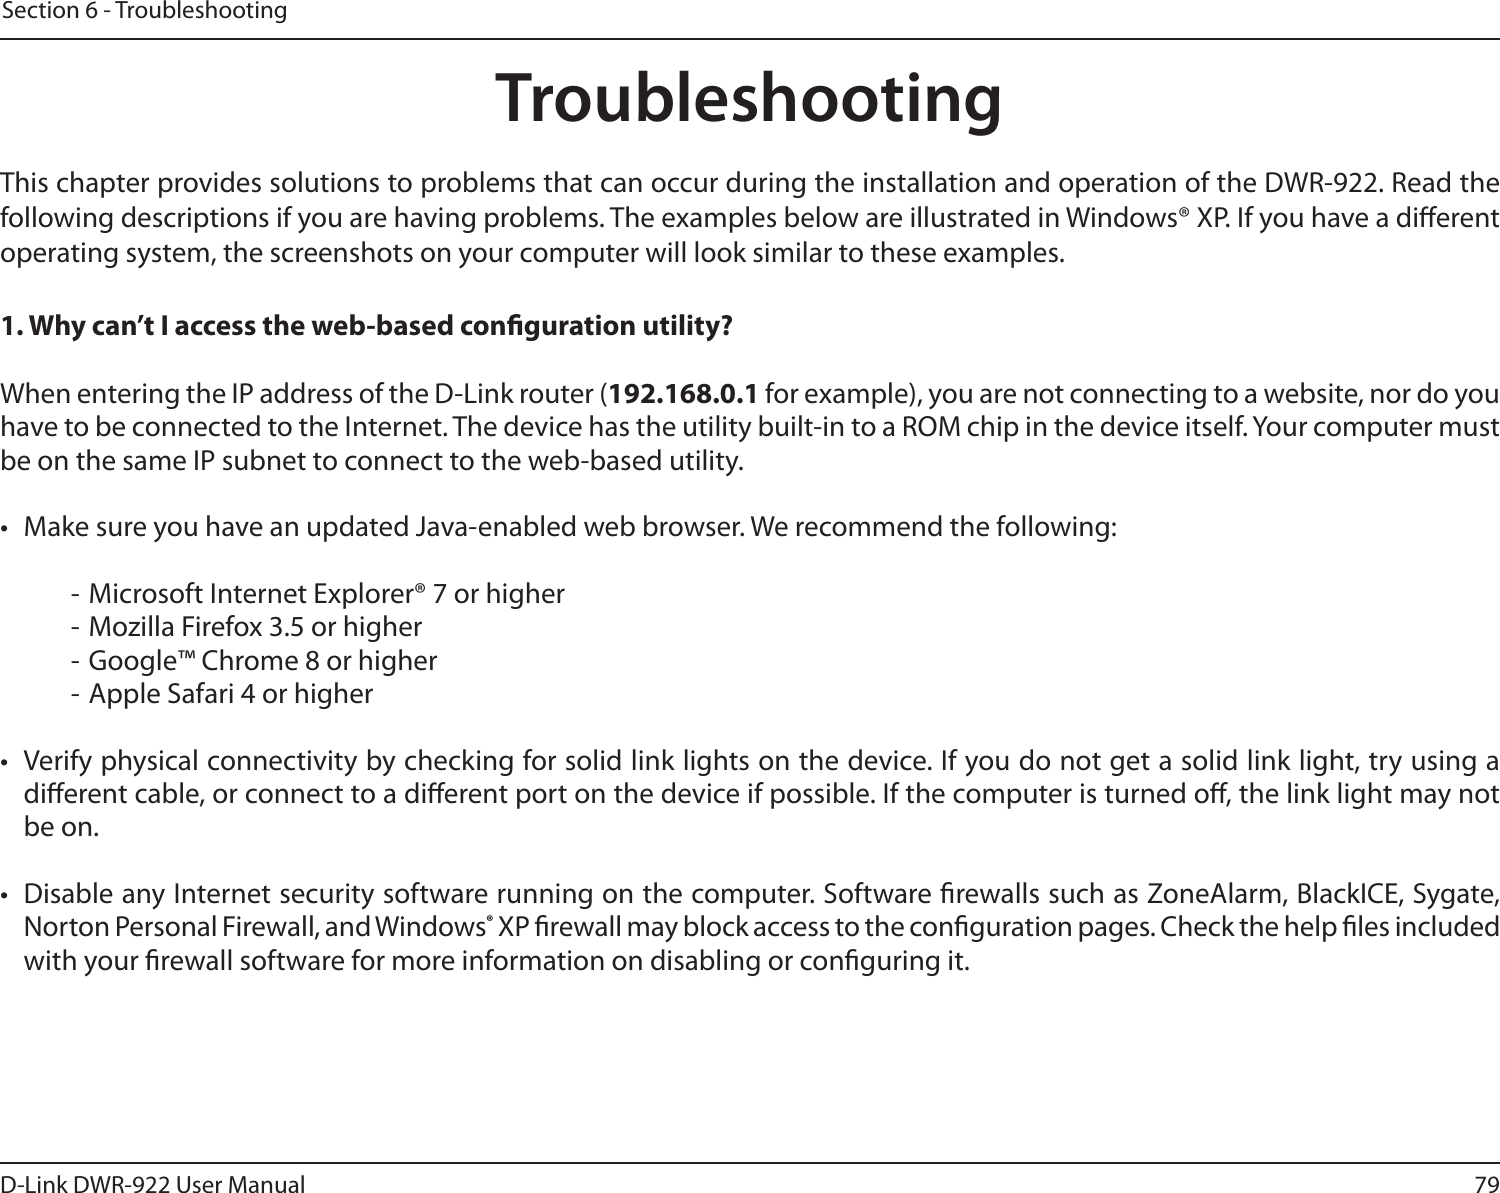 79D-Link DWR-922 User ManualSection 6 - TroubleshootingTroubleshootingThis chapter provides solutions to problems that can occur during the installation and operation of the DWR-922. Read the following descriptions if you are having problems. The examples below are illustrated in Windows® XP. If you have a dierent operating system, the screenshots on your computer will look similar to these examples.1. Why can’t I access the web-based conguration utility?When entering the IP address of the D-Link router (192.168.0.1 for example), you are not connecting to a website, nor do you have to be connected to the Internet. The device has the utility built-in to a ROM chip in the device itself. Your computer must be on the same IP subnet to connect to the web-based utility. •  Make sure you have an updated Java-enabled web browser. We recommend the following:  - Microsoft Internet Explorer® 7 or higher- Mozilla Firefox 3.5 or higher- Google™ Chrome 8 or higher- Apple Safari 4 or higher•  Verify physical connectivity by checking for solid link lights on the device. If you do not get a solid link light, try using a dierent cable, or connect to a dierent port on the device if possible. If the computer is turned o, the link light may not be on.•  Disable any Internet security software running on the computer. Software rewalls such as ZoneAlarm, BlackICE, Sygate, Norton Personal Firewall, and Windows® XP rewall may block access to the conguration pages. Check the help les included with your rewall software for more information on disabling or conguring it.